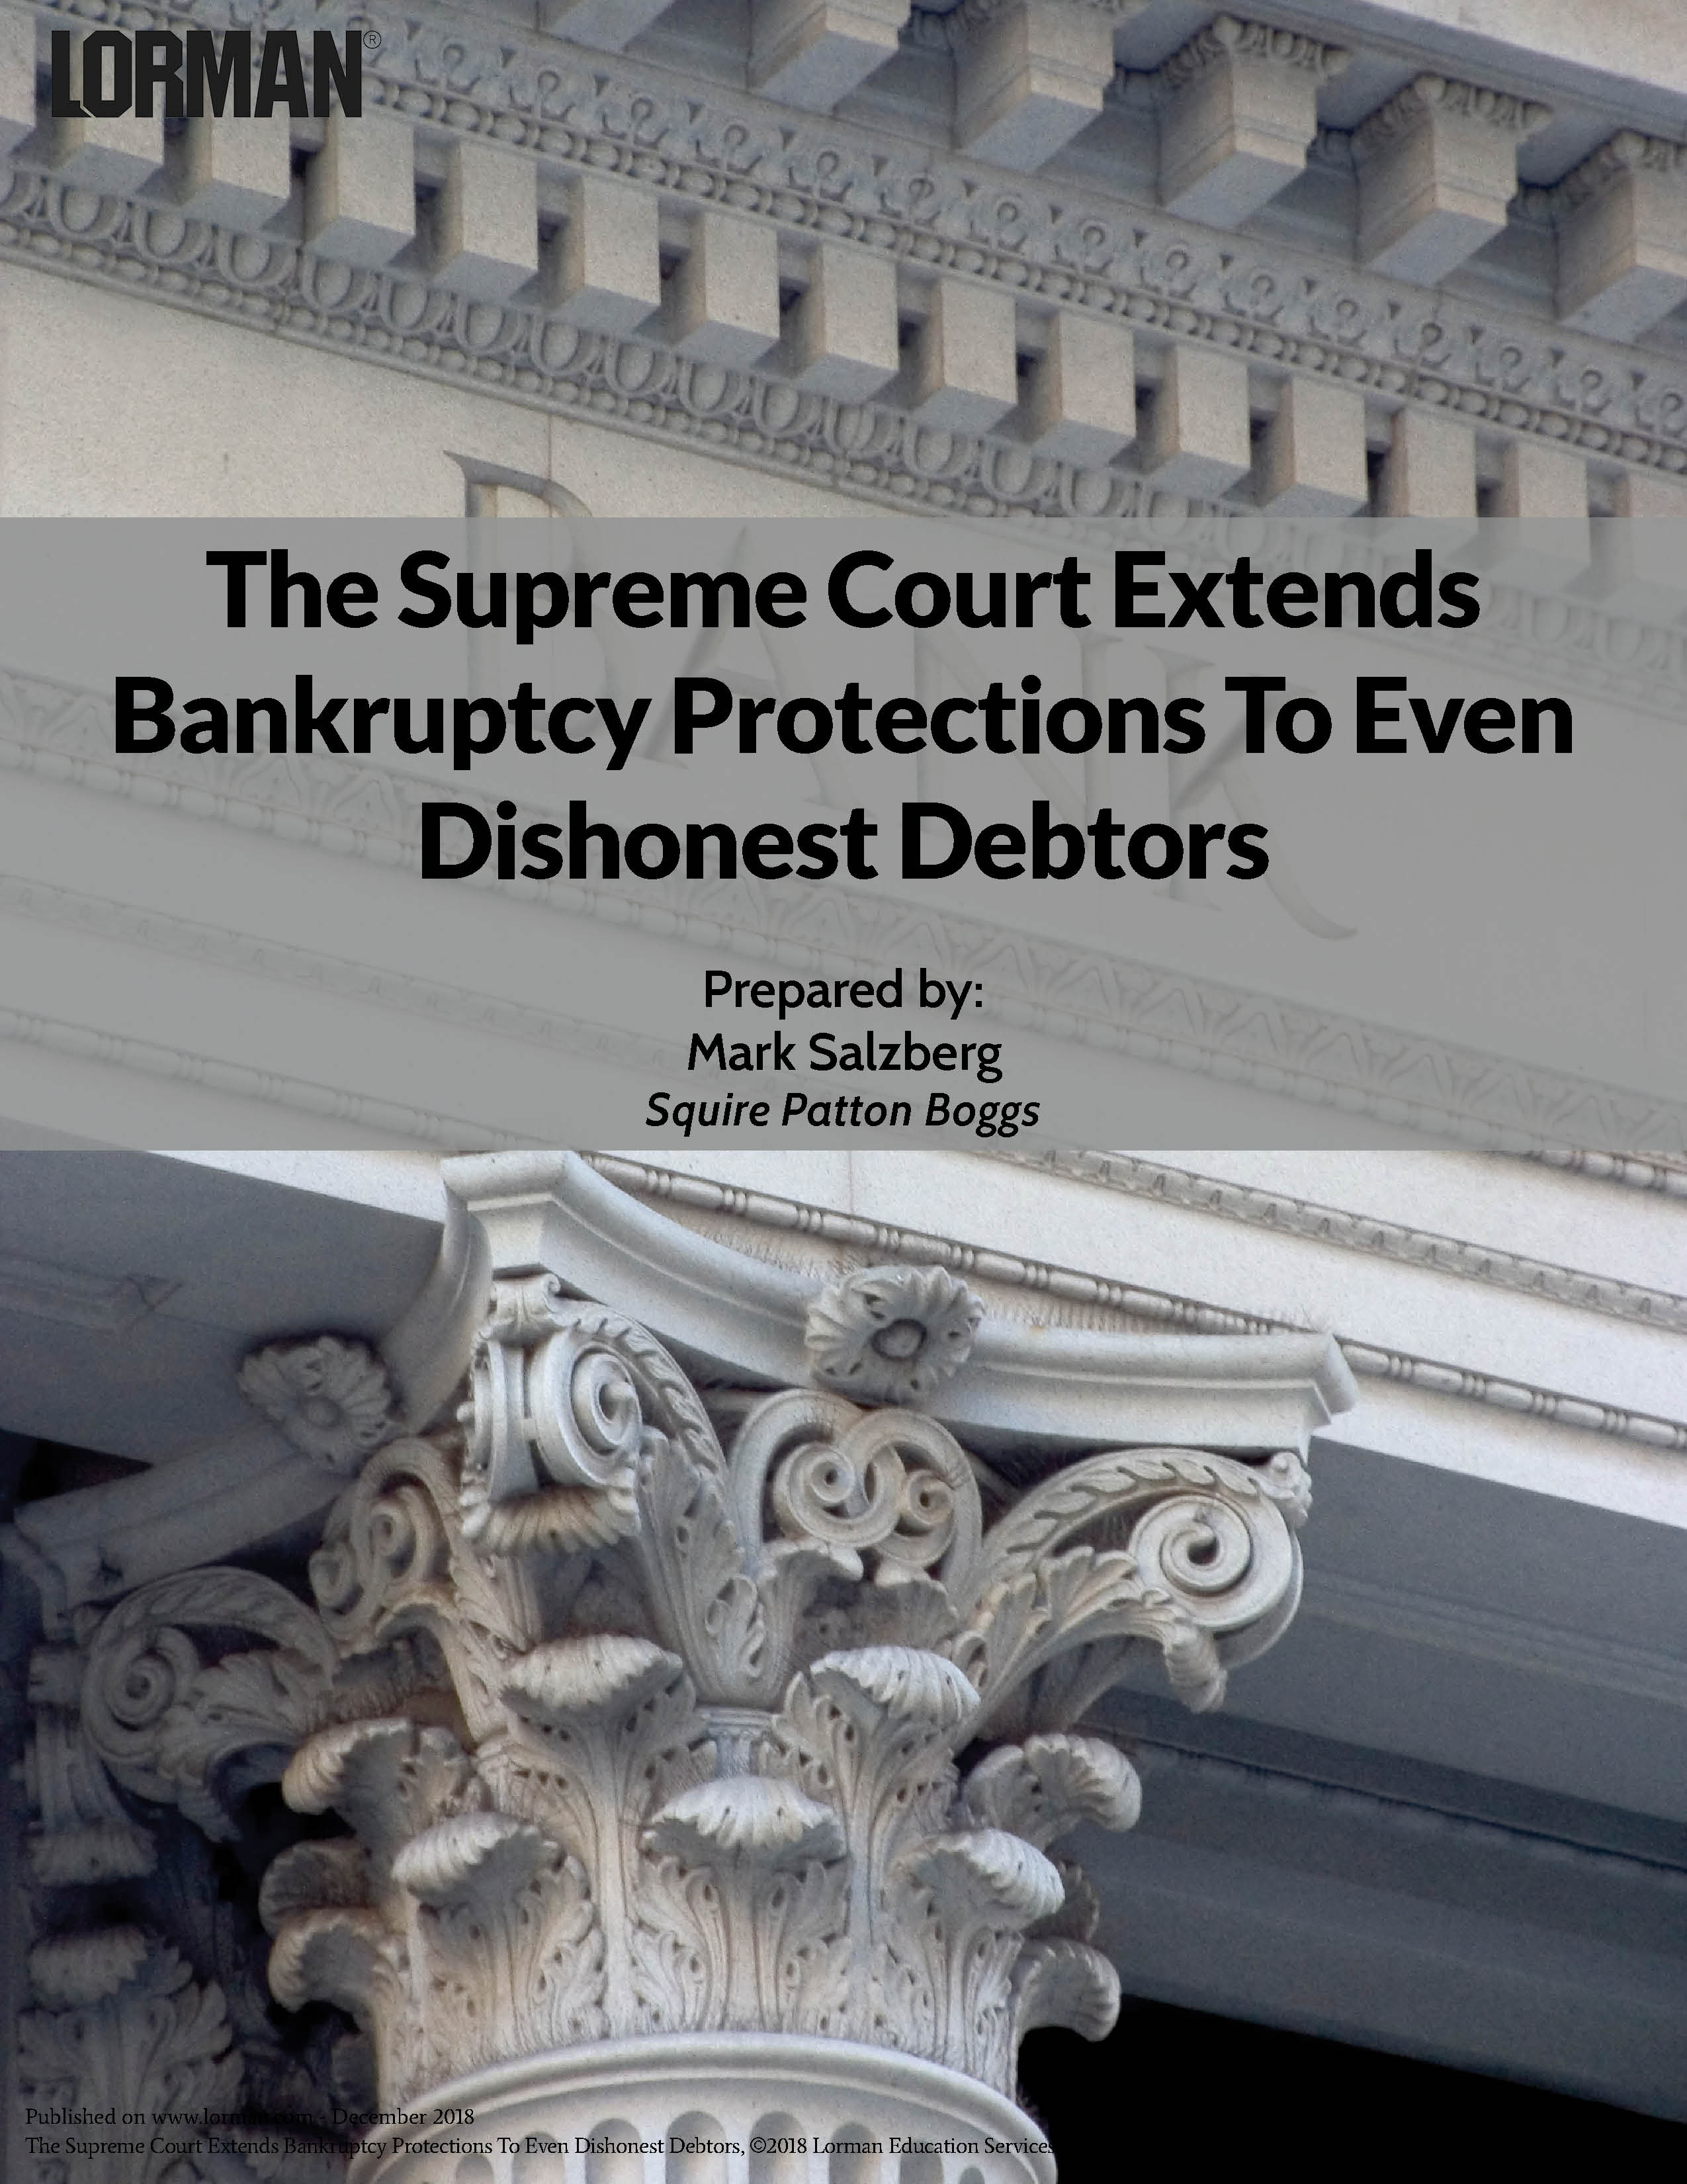 The Supreme Court Extends Bankruptcy Protections To Even Dishonest Debtors